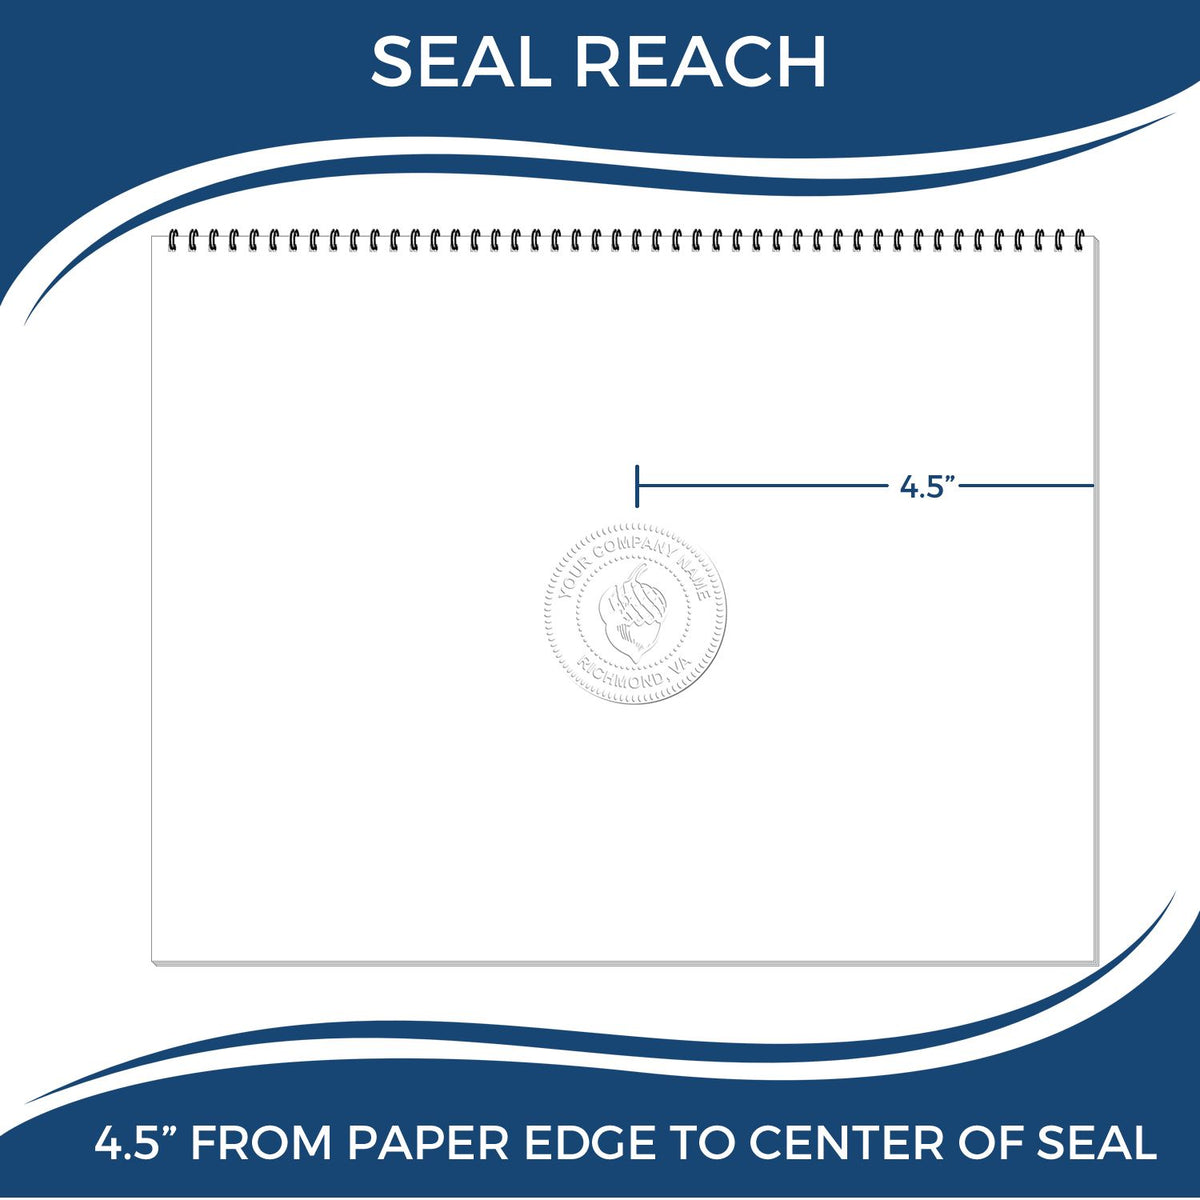 An infographic showing the seal reach which is represented by a ruler and a miniature seal image of the State of Georgia Extended Long Reach Engineer Seal